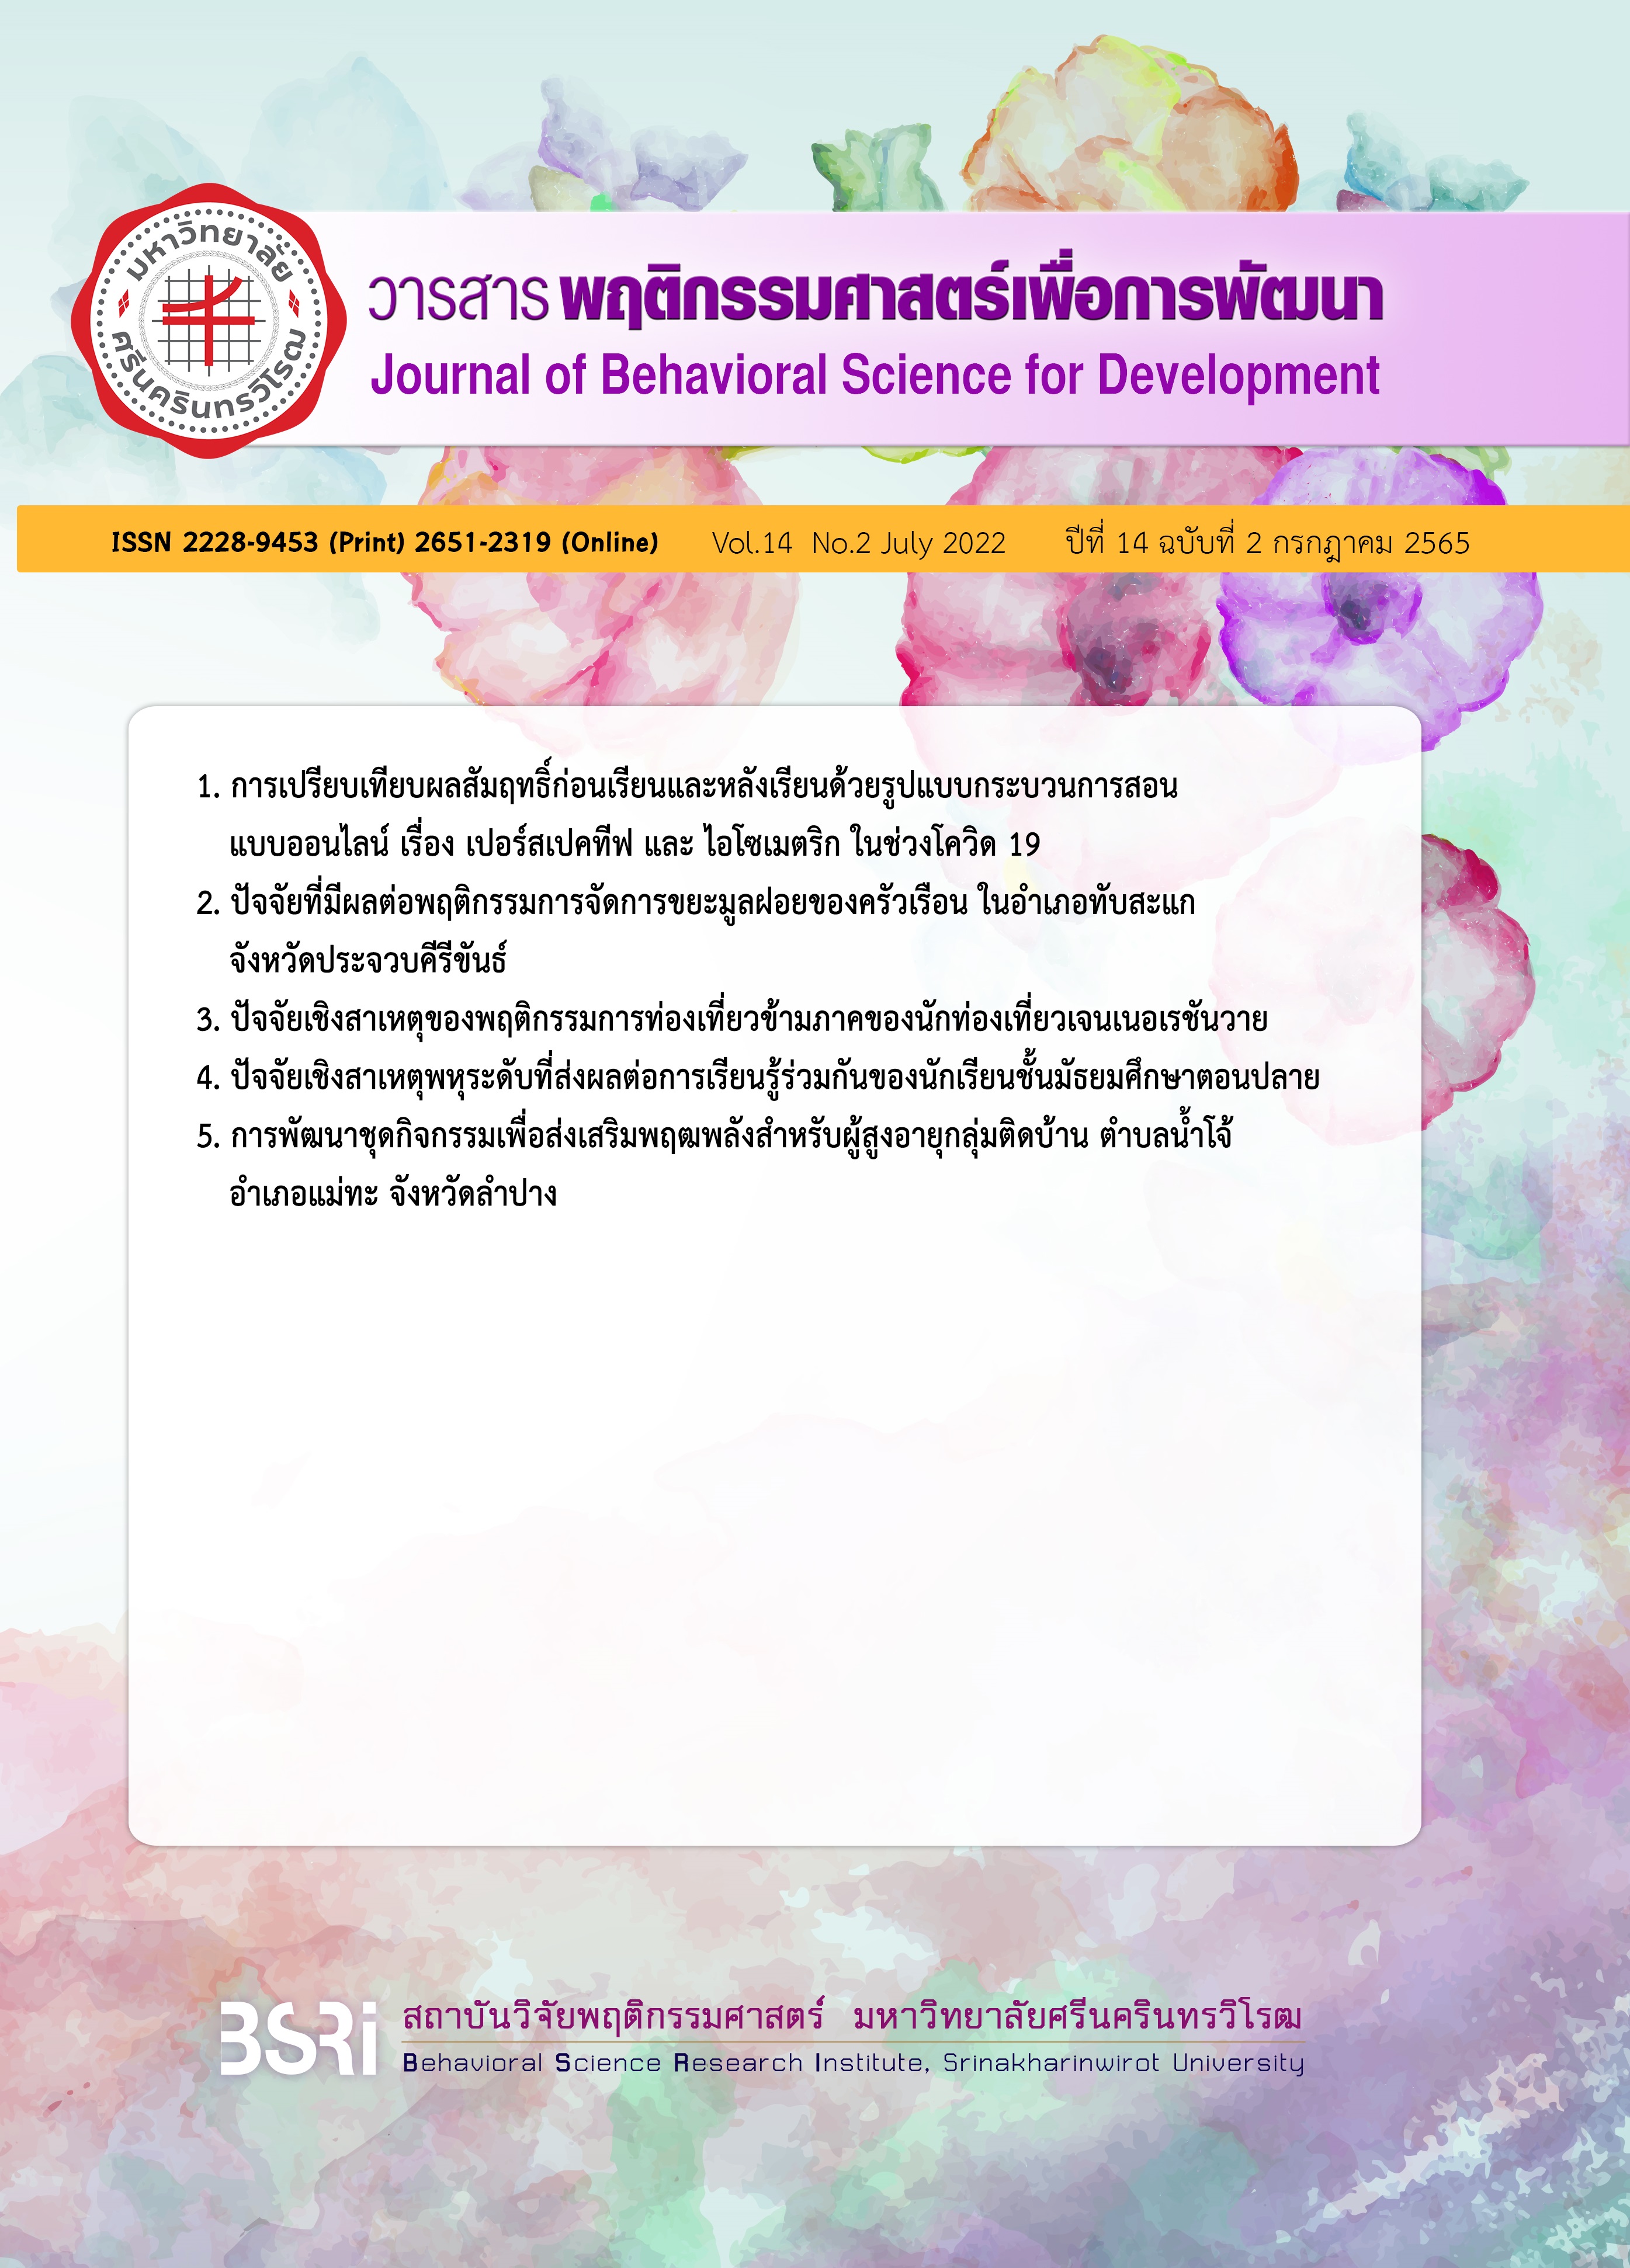 					View Vol. 14 No. 2 (2022): July 2022 (The Journal of Behavioral Science for Development, Vol. 14 Issue 2 july 2022)
				